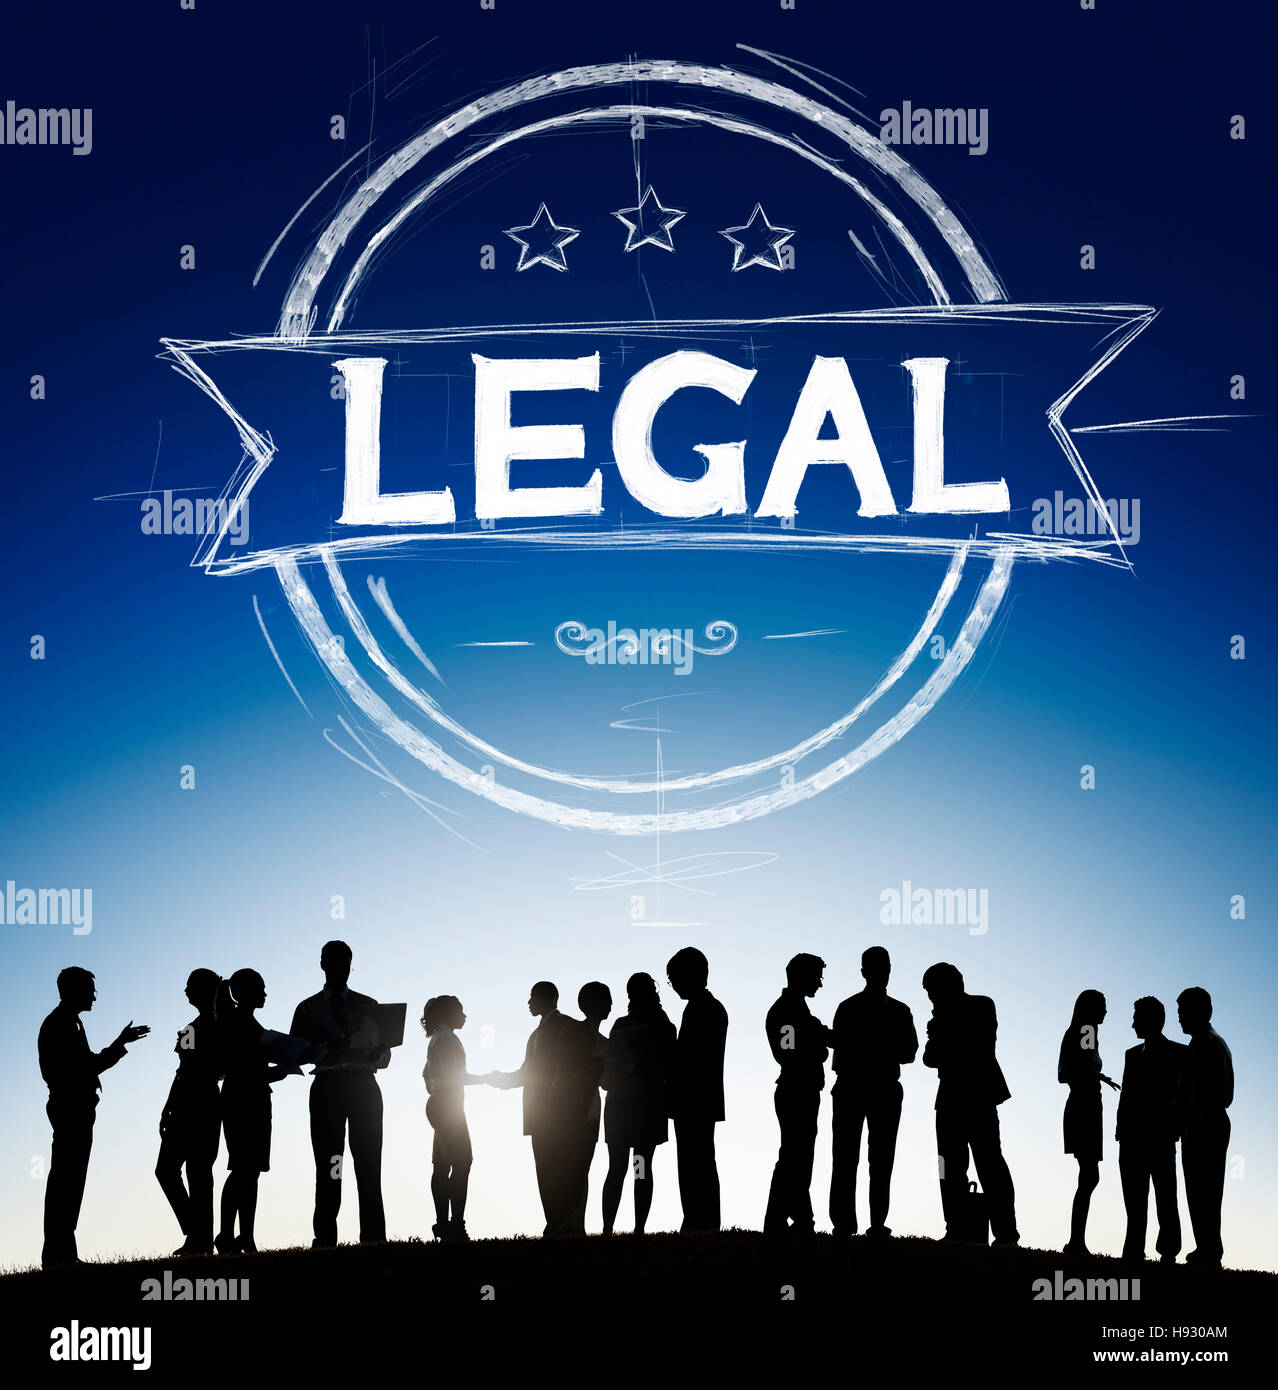 Legal Legalisation Laws Justice Ethical Concept Stock Photo